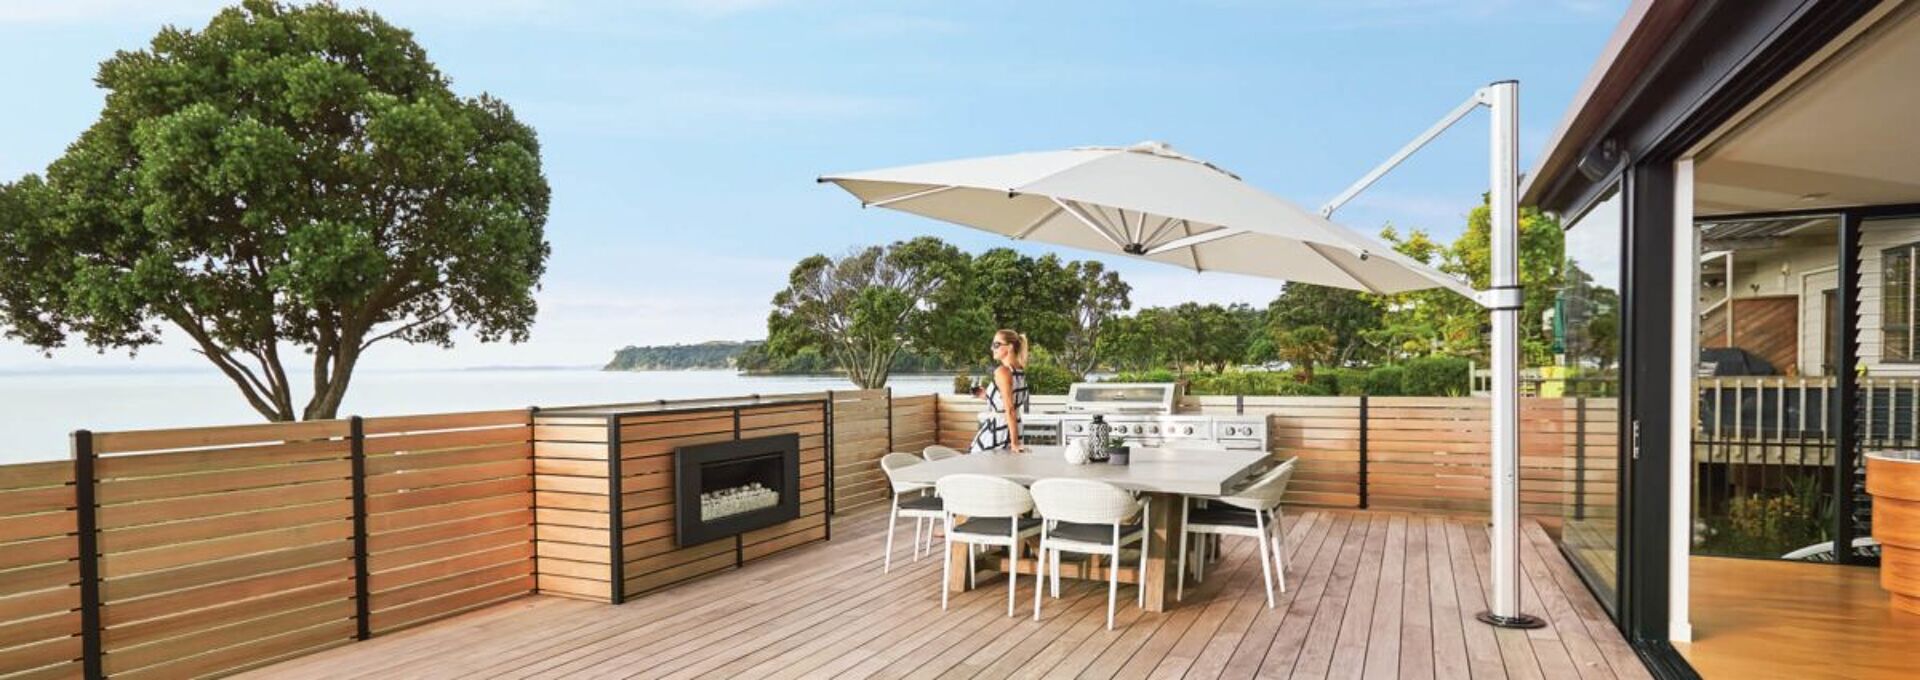 Large Cantilever Umbrella White in NZ